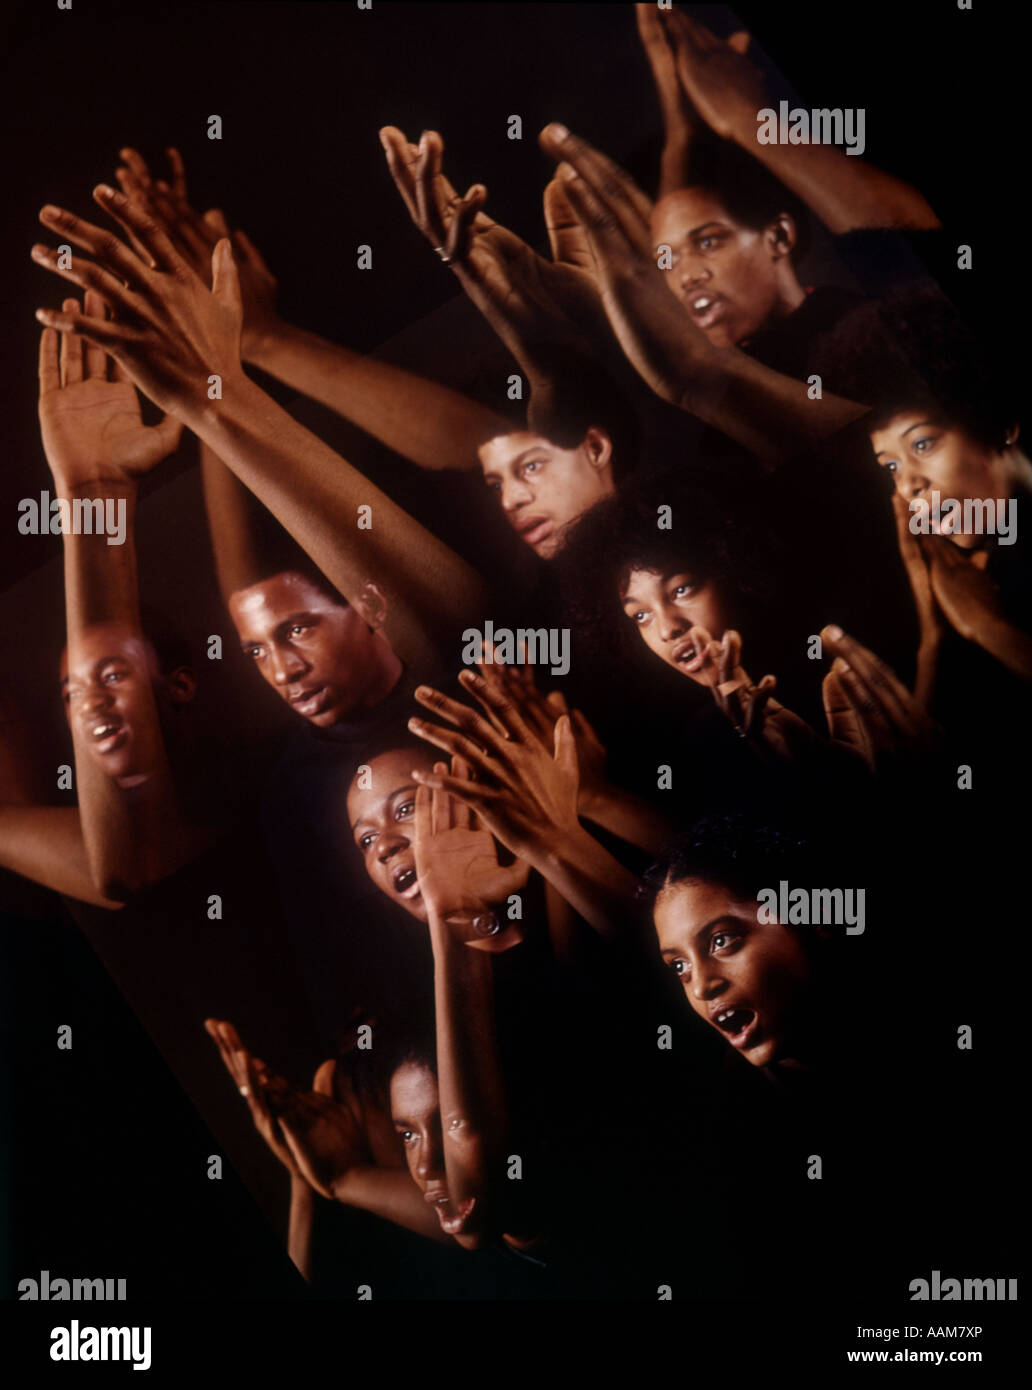 1970 1970s MONTAGE MULTIPLE EXPOSURE AFRICAN-AMERICAN FACES ARMS HANDS GOSPEL SINGERS SINGING CHORUS Stock Photo